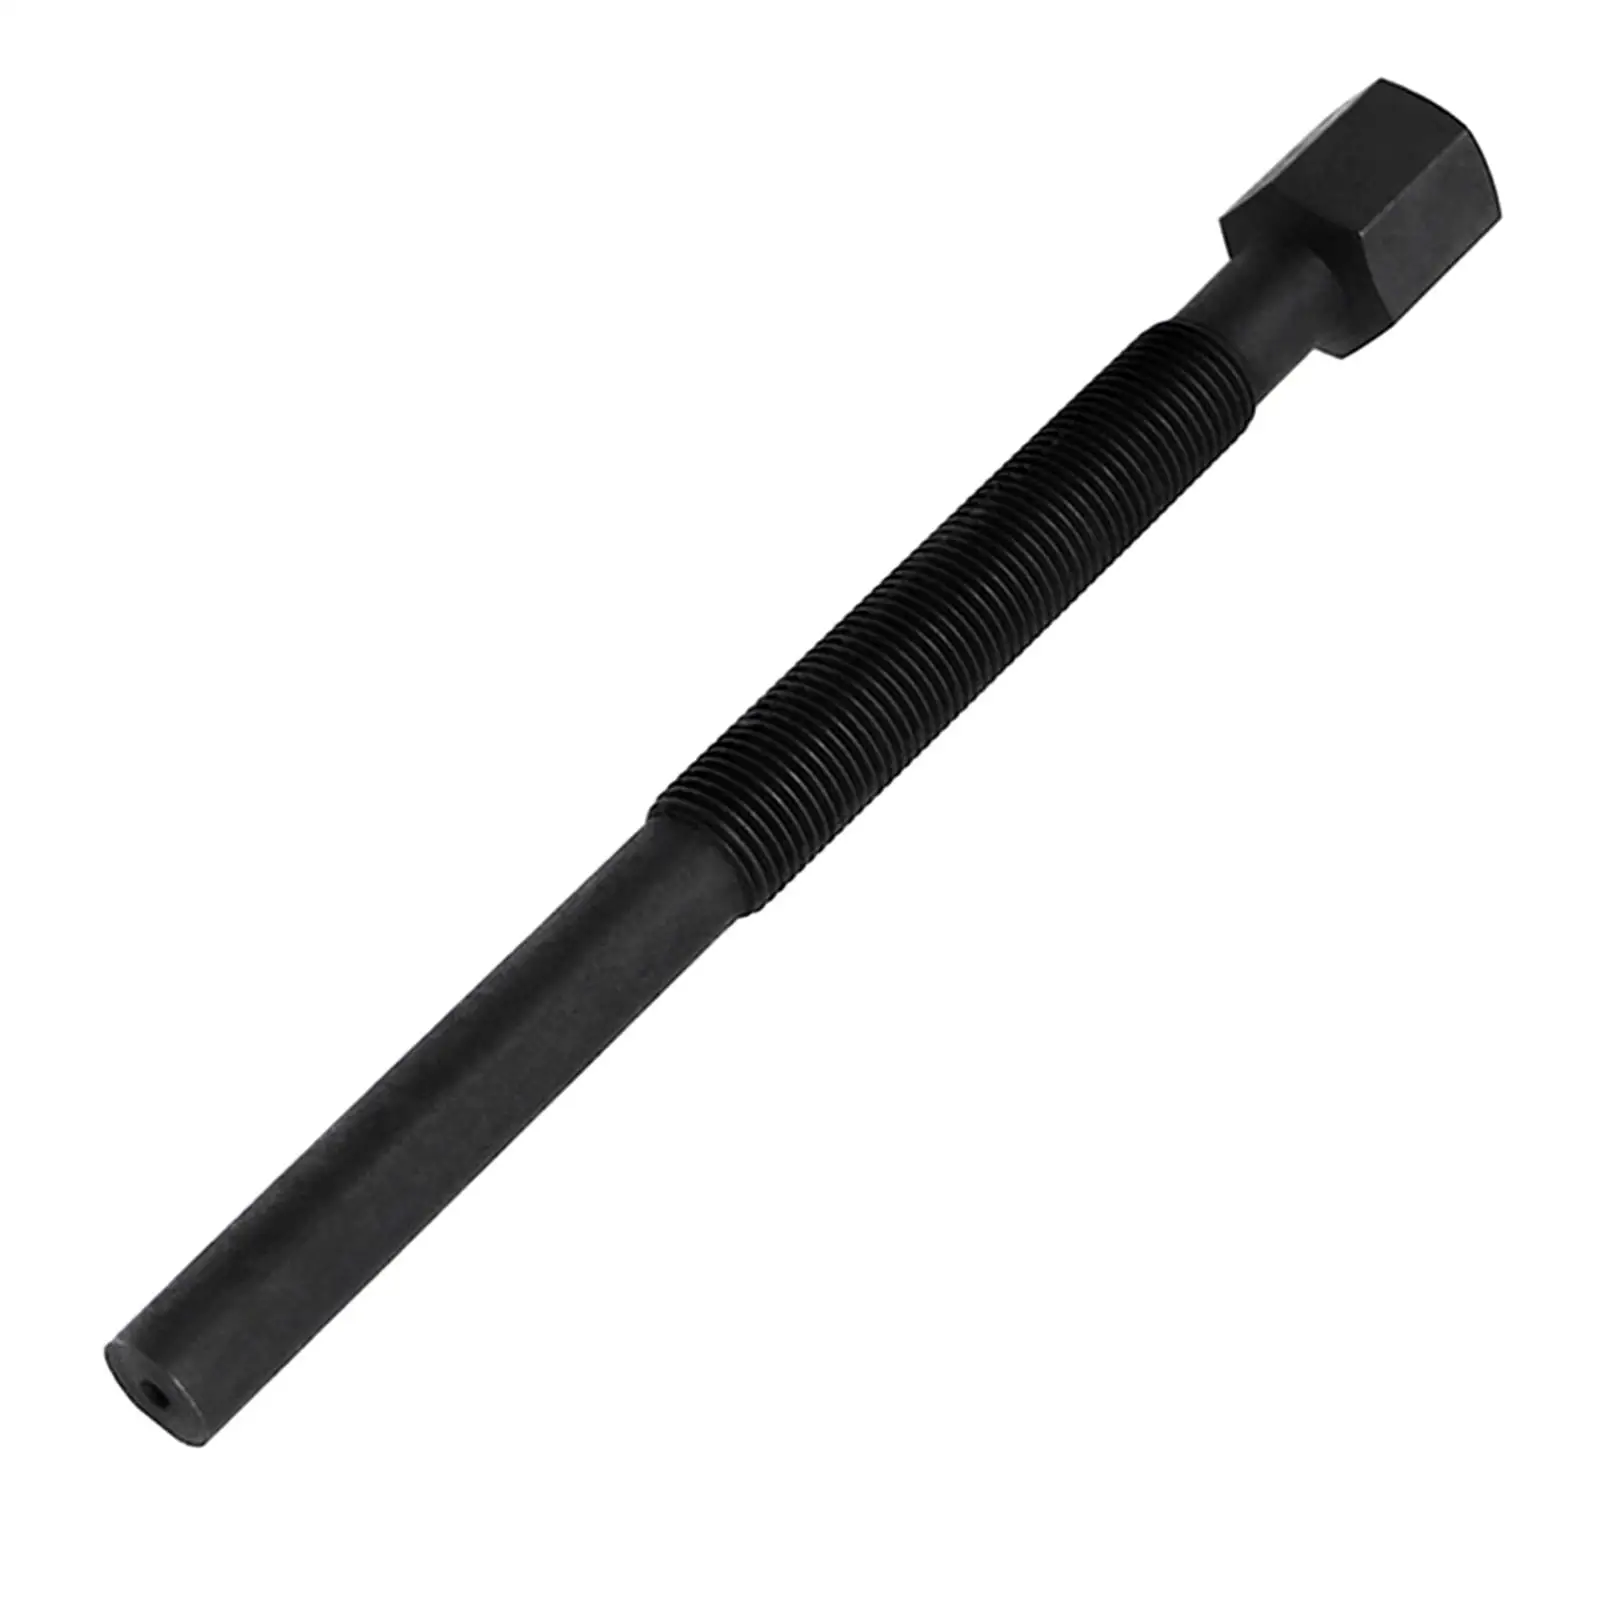 Clutch Puller Removal Tool Portable Black Sturdy Simple to Use Accessory Jdg1641 for John Deere Gators Direct Replace Durable